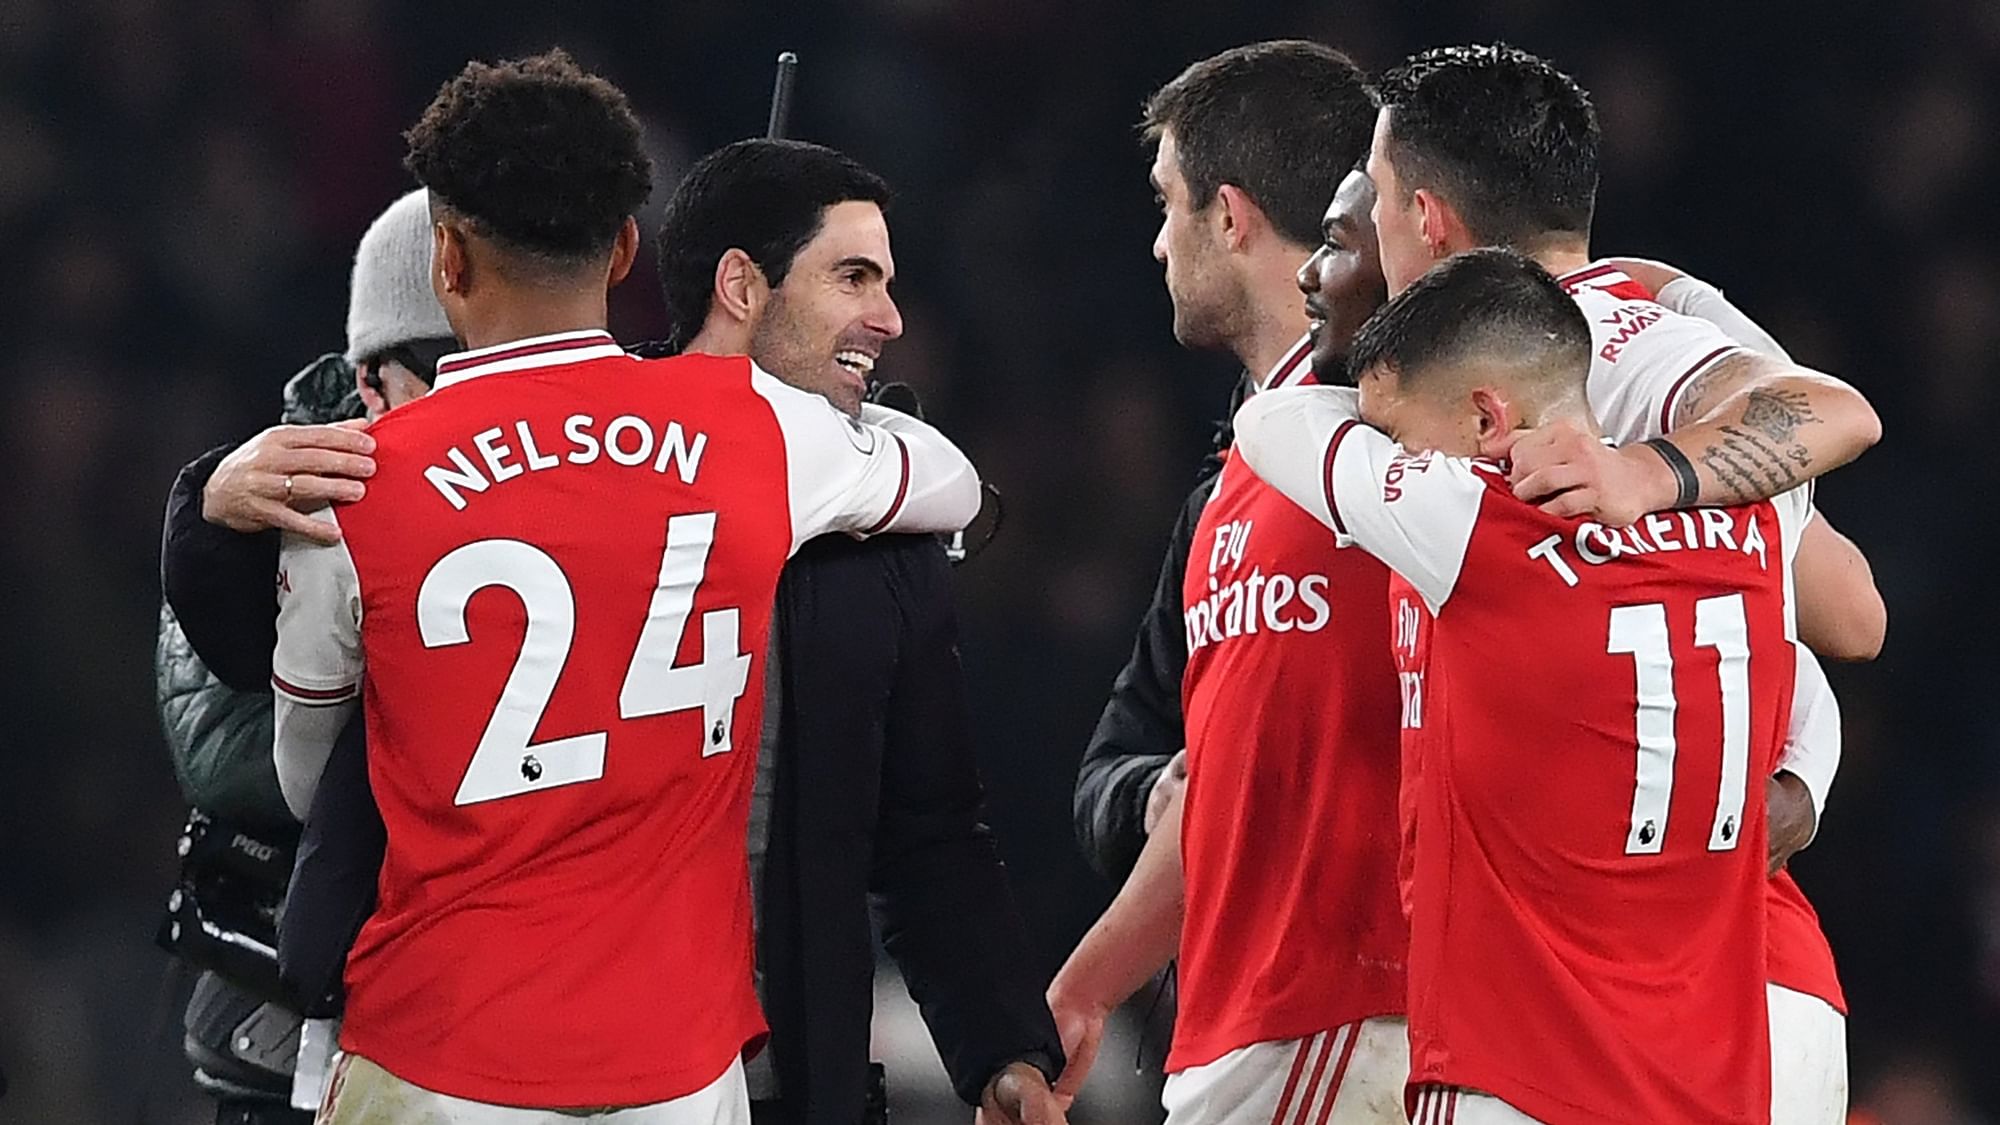 Mikel Arteta got everything he asked for in his first win as Arsenal manager with a rampant first 45 minutes from the Gunners earning a 2-0 victory over Manchester United at the Emirates.